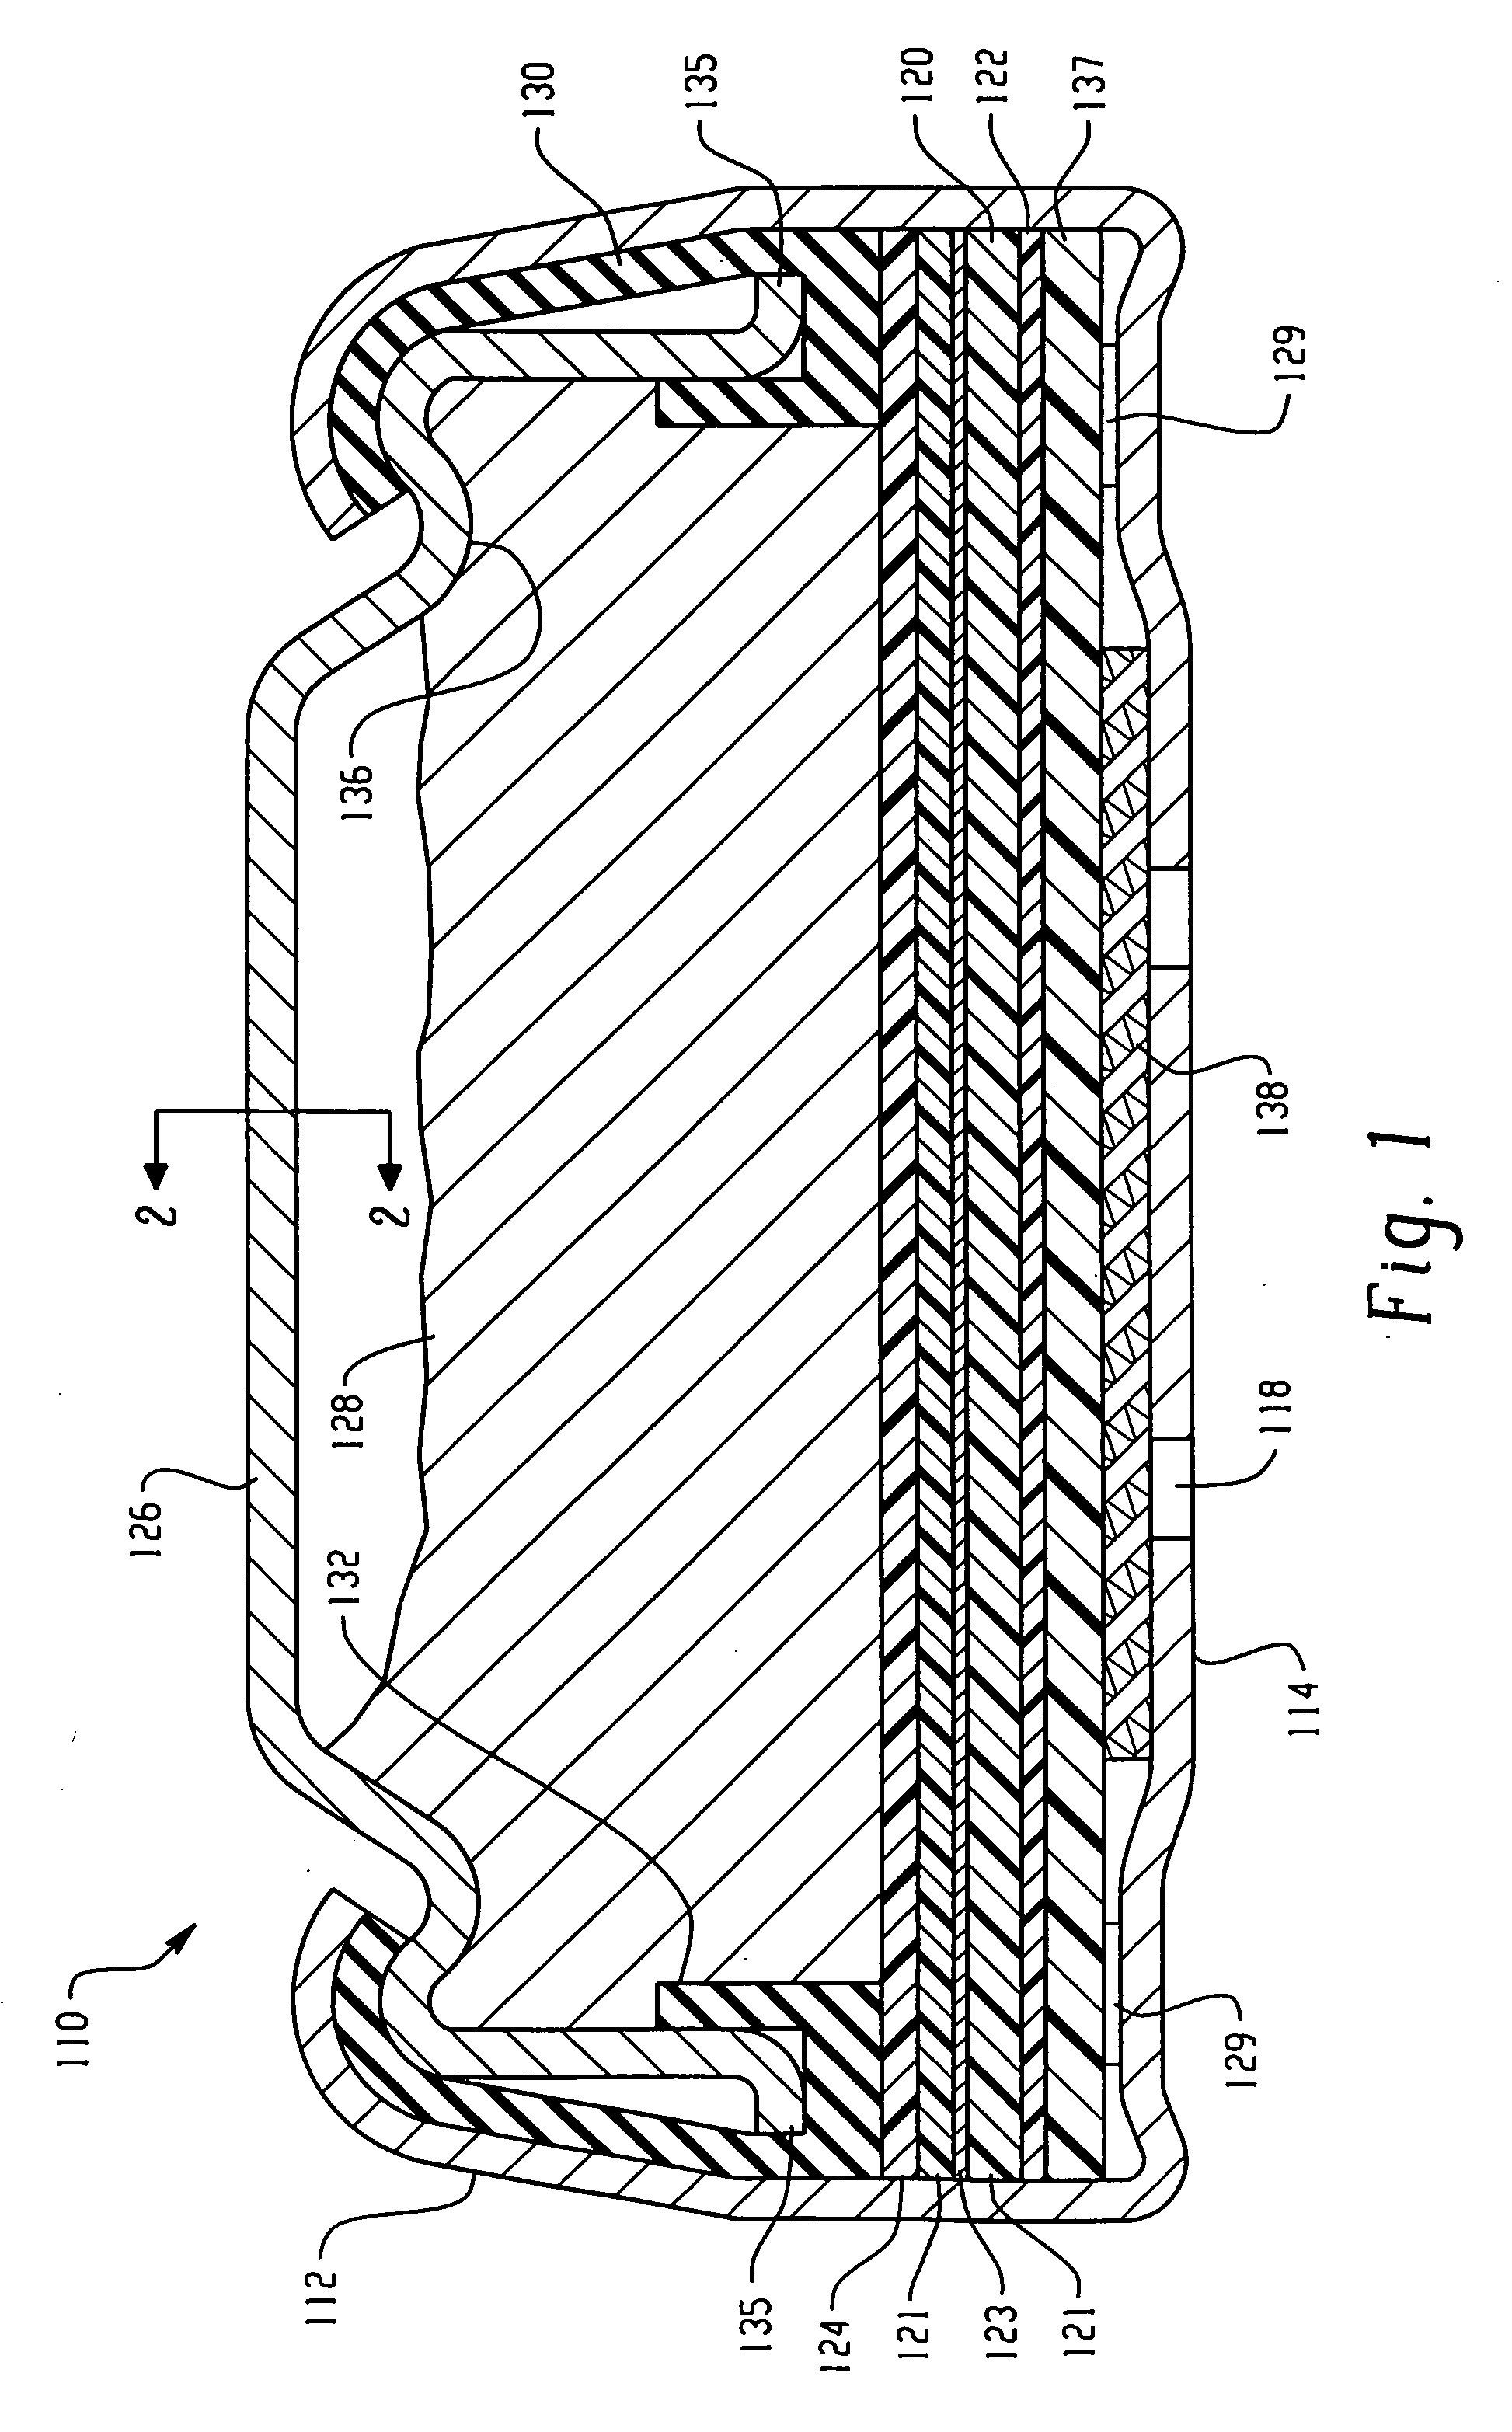 Electrochemical Cell With A Catalytic Electrode And Process For Making The Electrode And The Cell